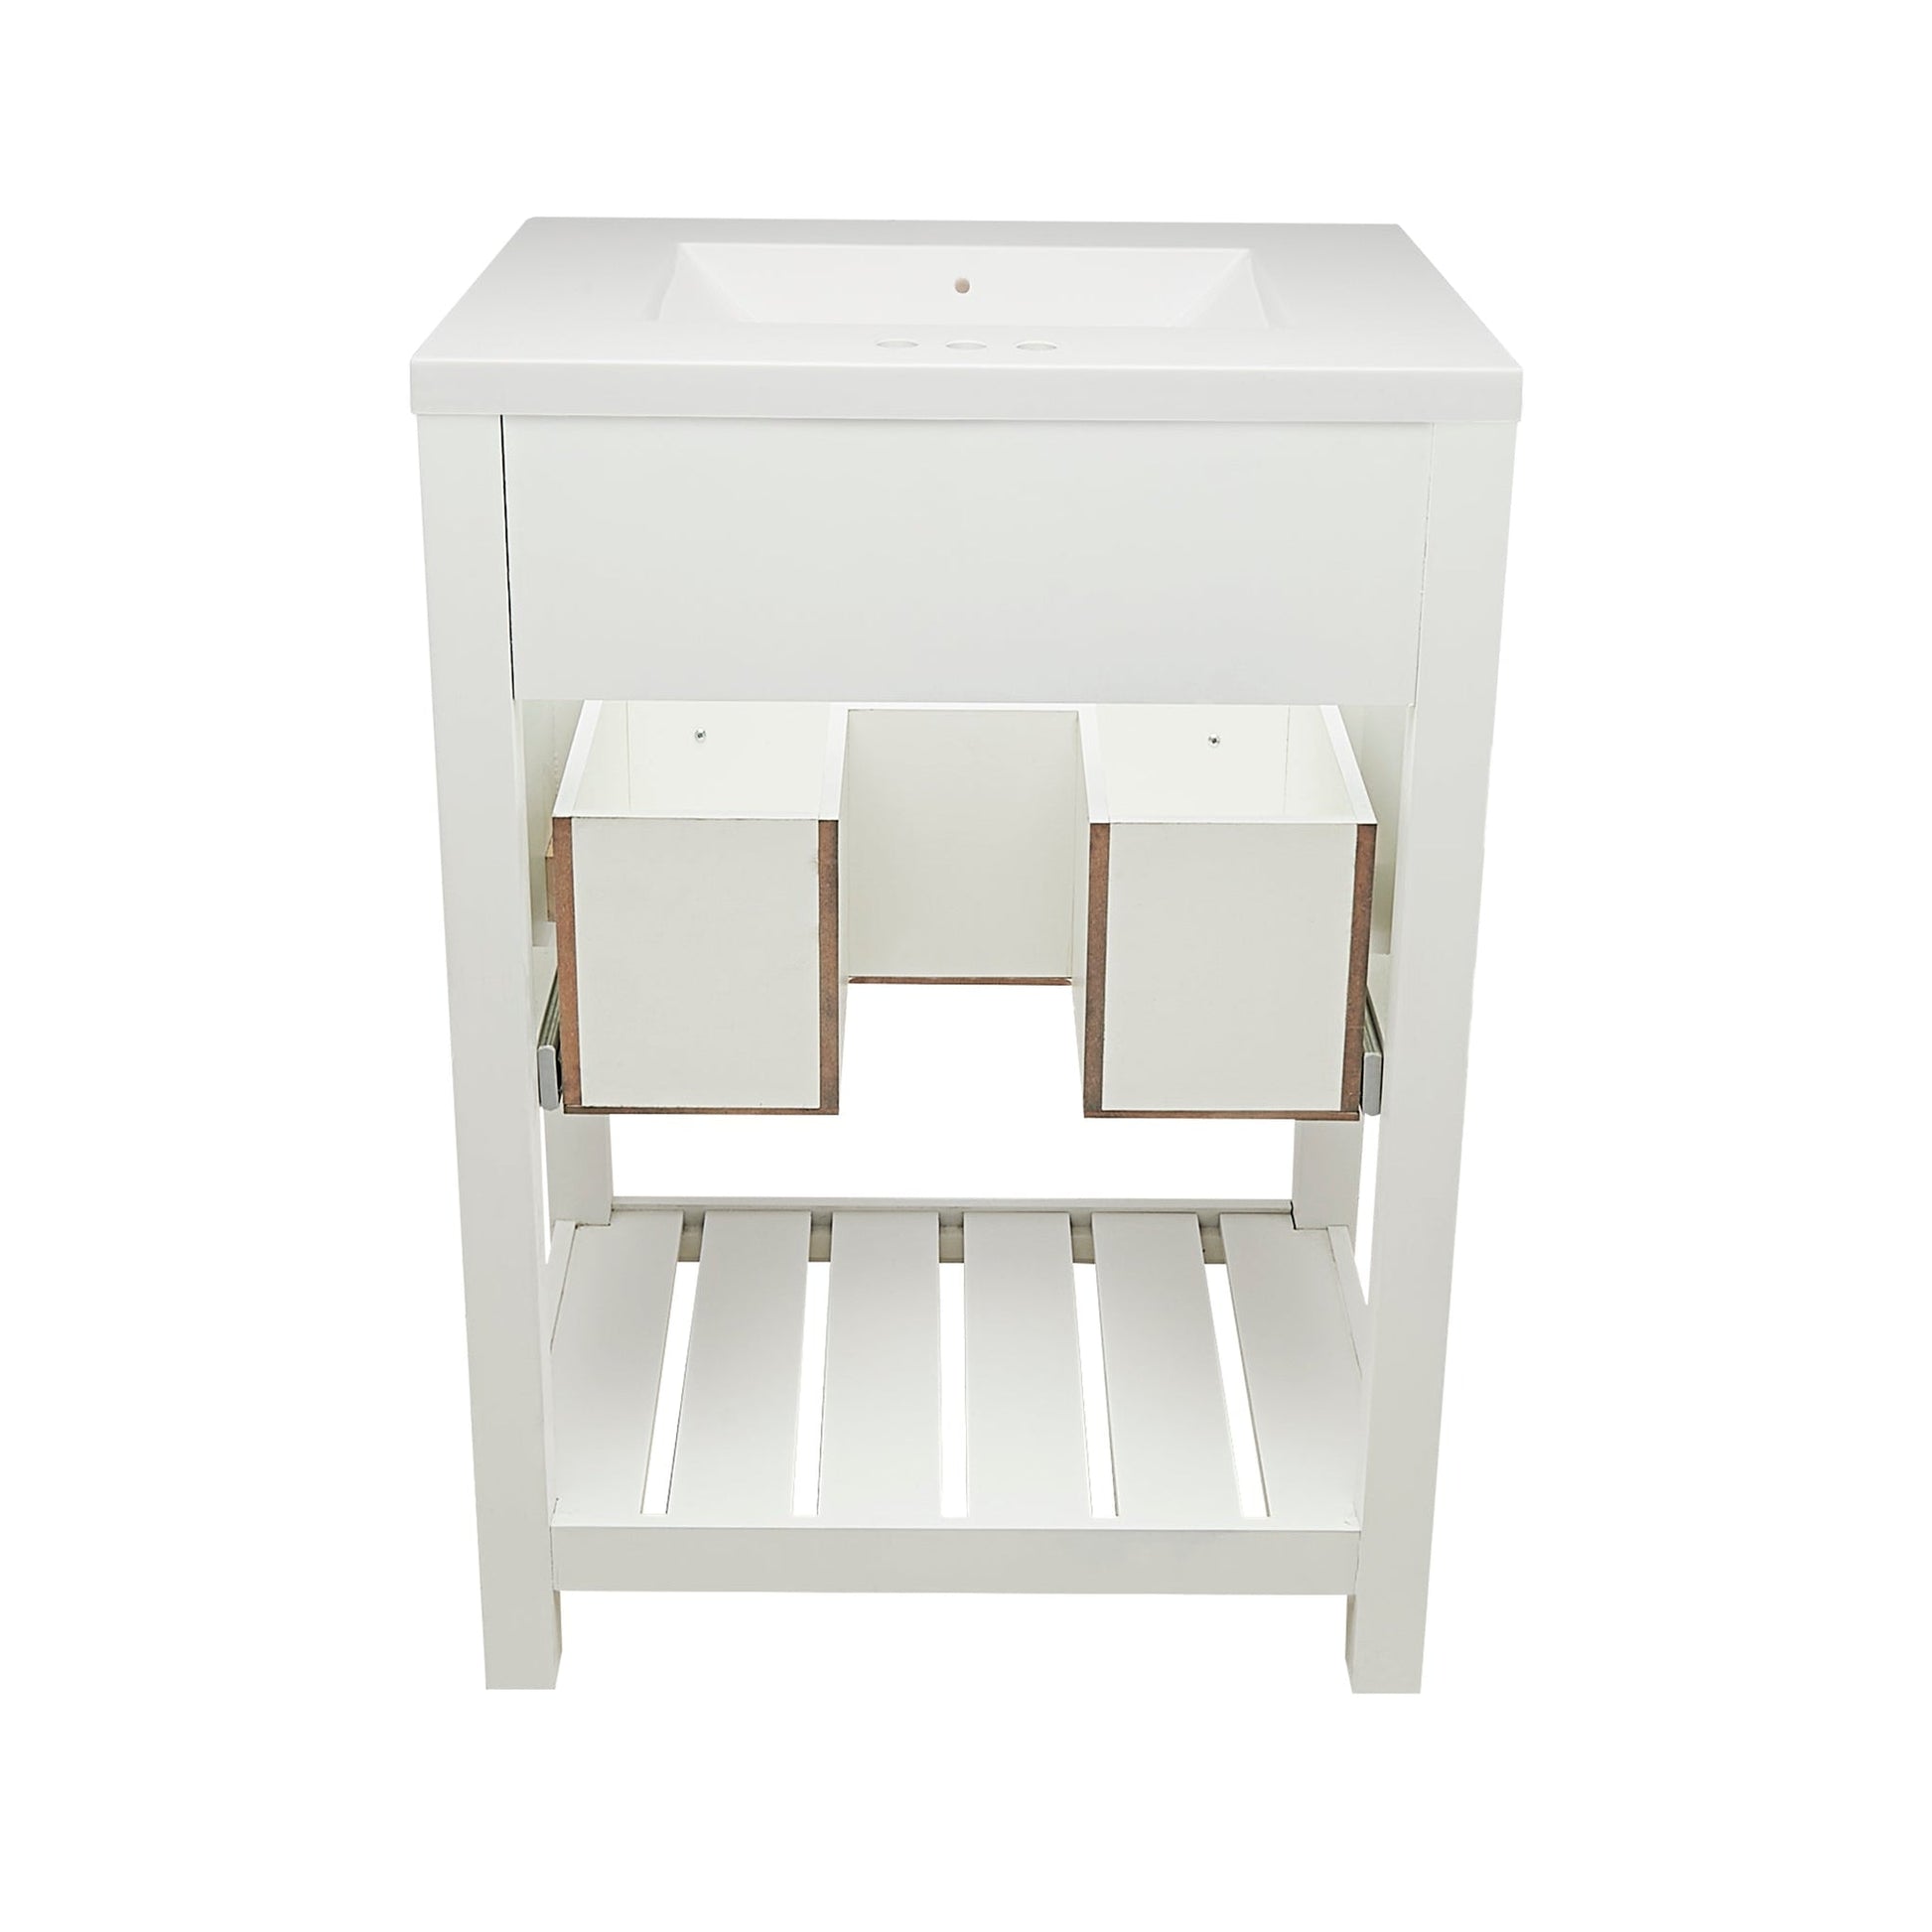 Ella's Bubbles Tremblant 25" White Bathroom Vanity With White Cultured Marble Vanity Top and Sink